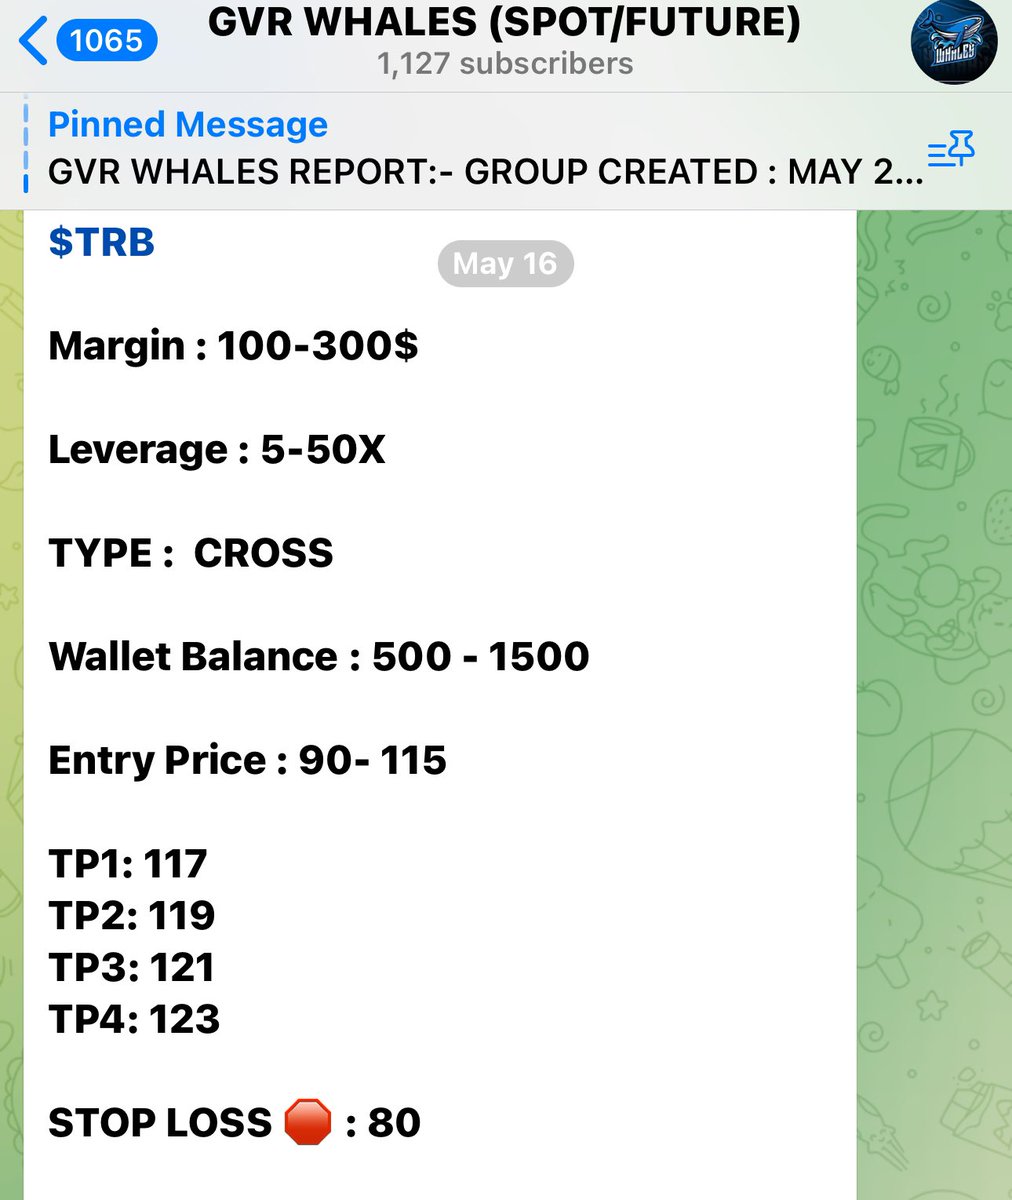 All Tps Done Successfully on my  1225th  future Trades $TRB in my #Crypto Whales Group 
Group Created: May 20th 2023
Total Posted Trades - 1225
Success Trades - 1085
Lost Trades - 140
How Much Gain : 273%

Join group now 👇👇
Dm for Link : t.me/CRYPTO_GVR

#Bitcoin